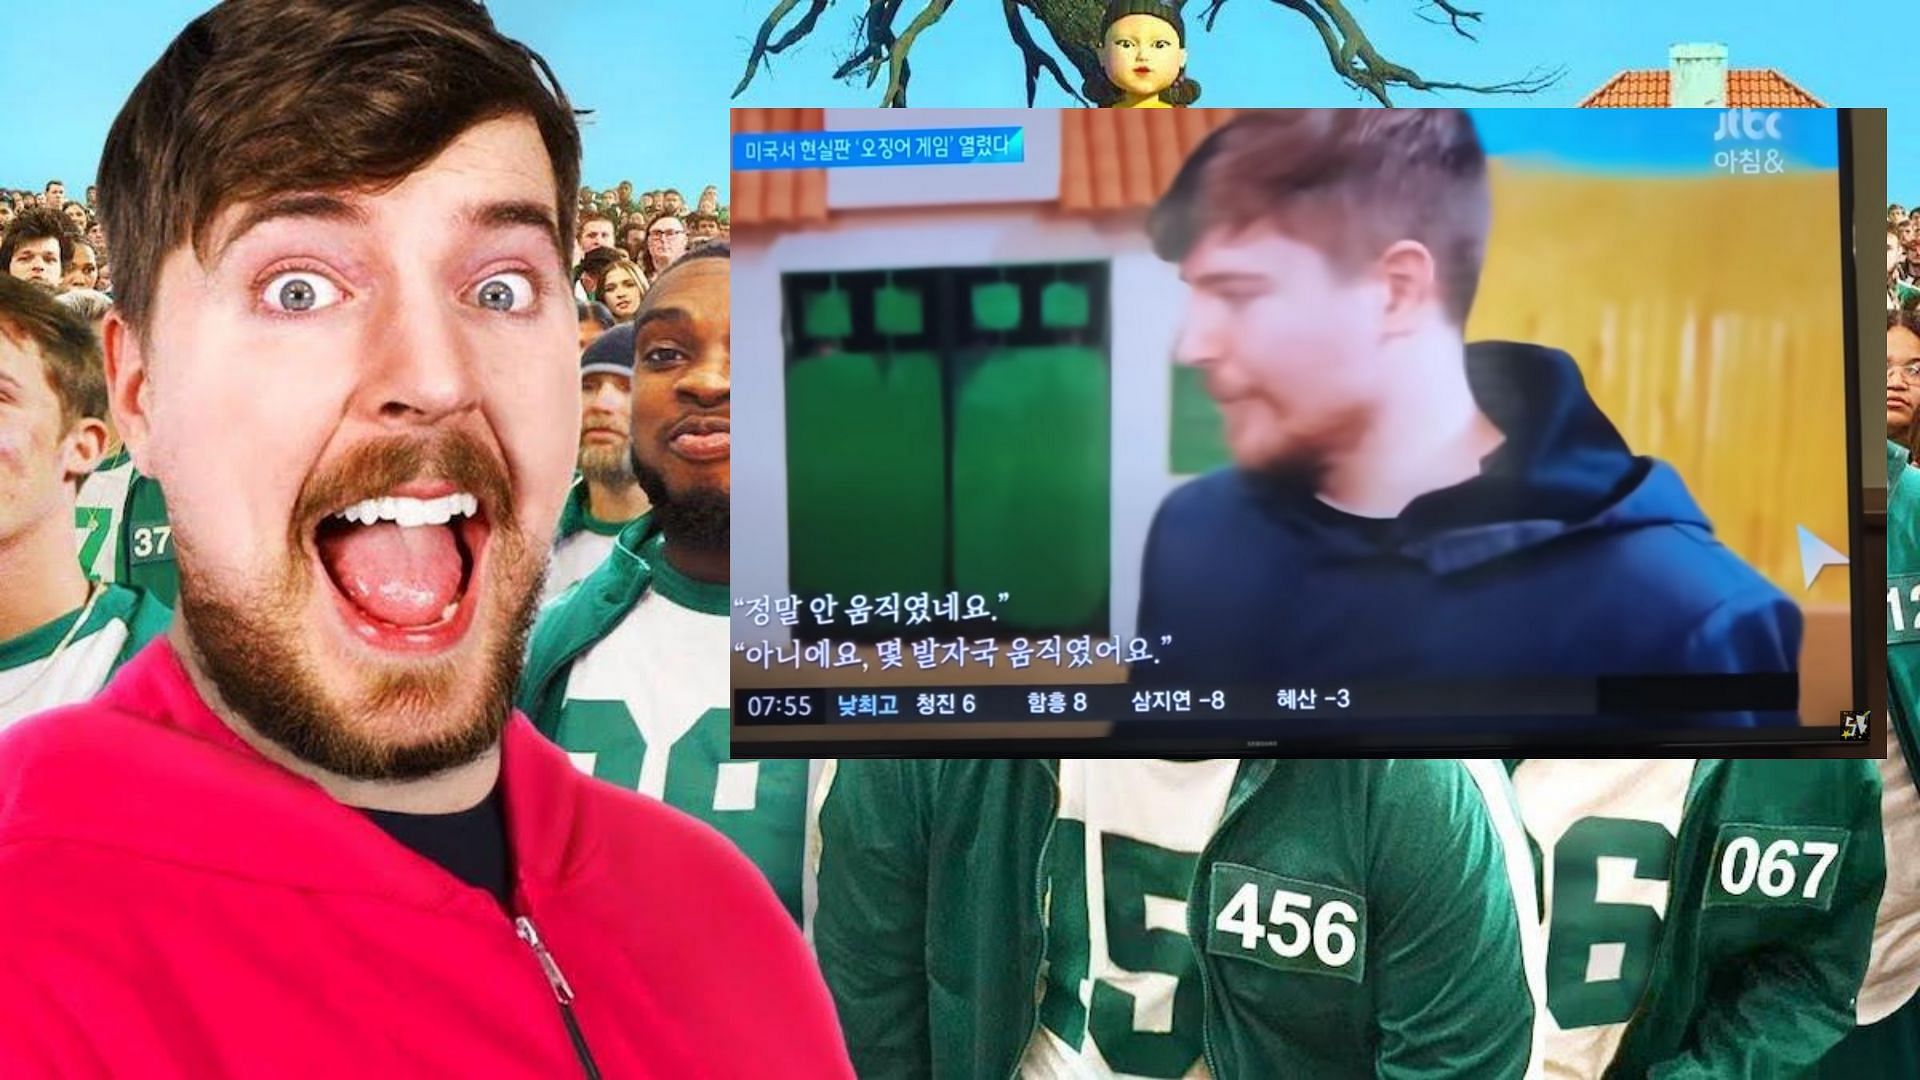 MrBeast catches the attention of Korean media with his Squid Game video (Image via Sportskeeda)